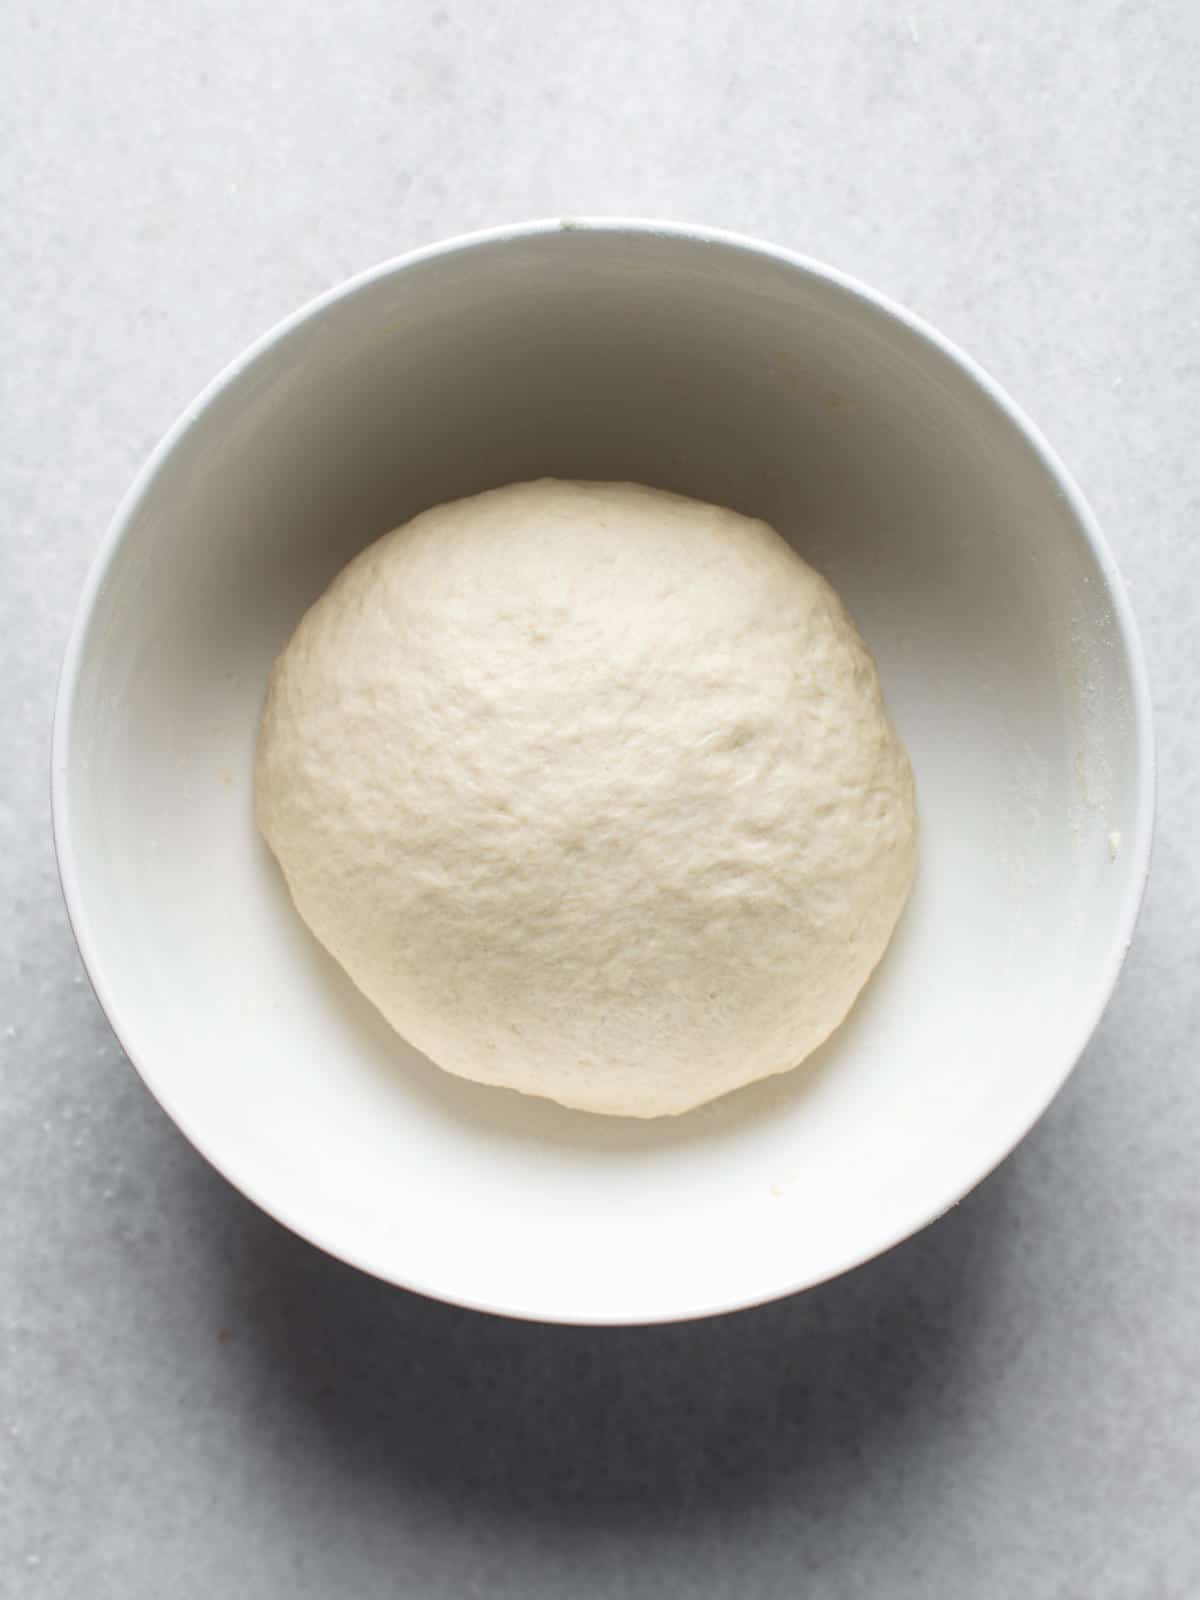 Ball of dough set in a bowl to rise.